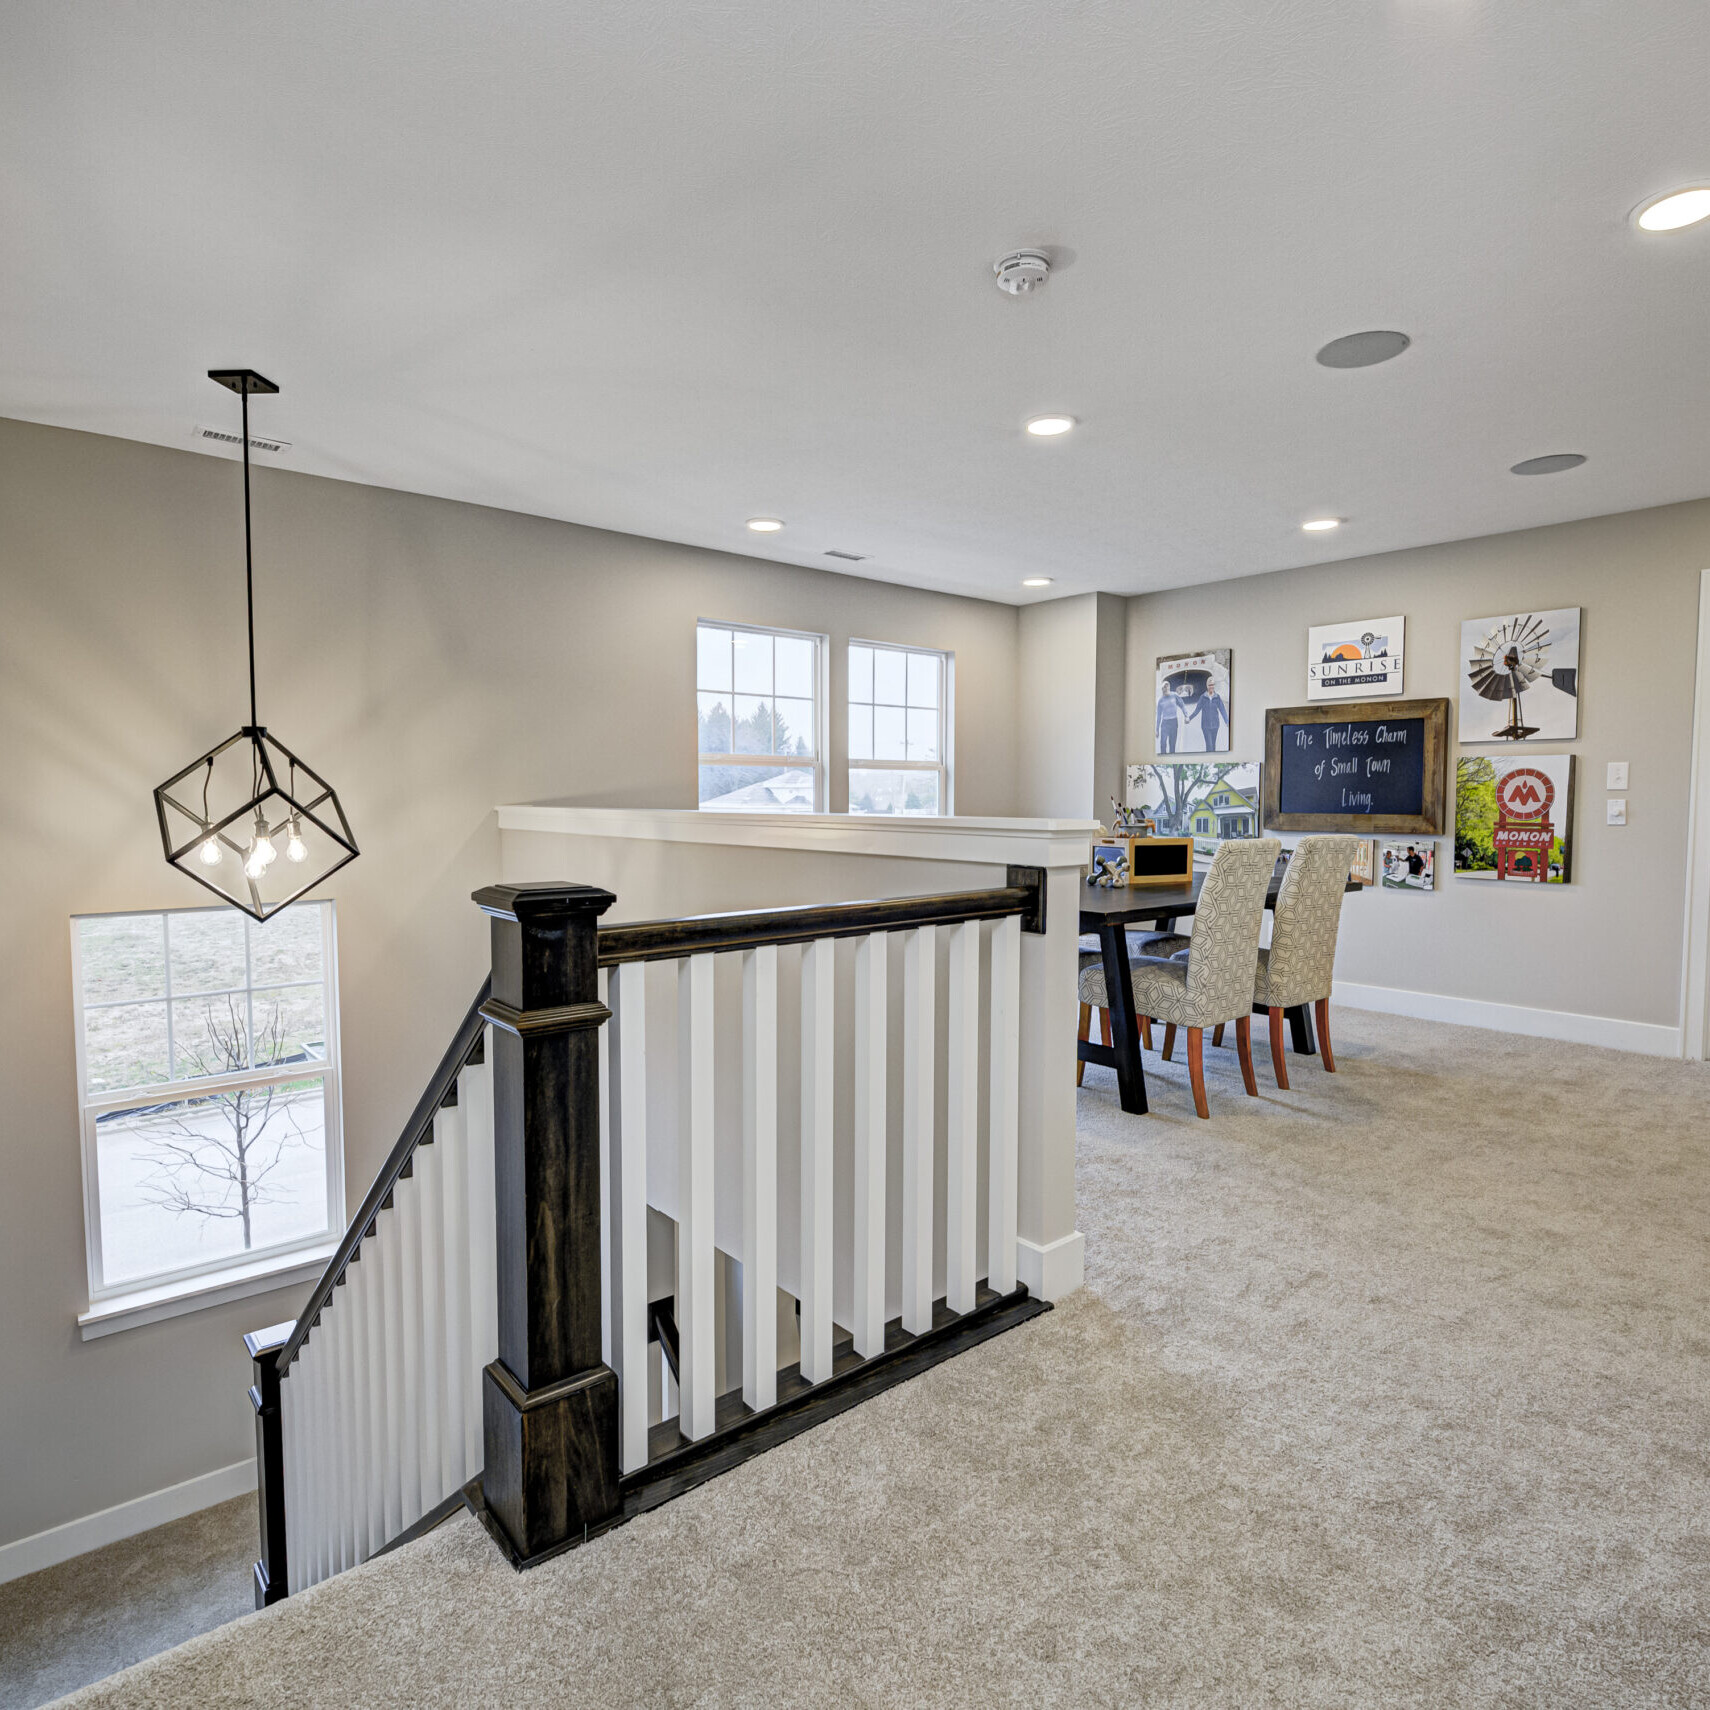         Description: A custom-built stairway leading to a dining room in a new home.